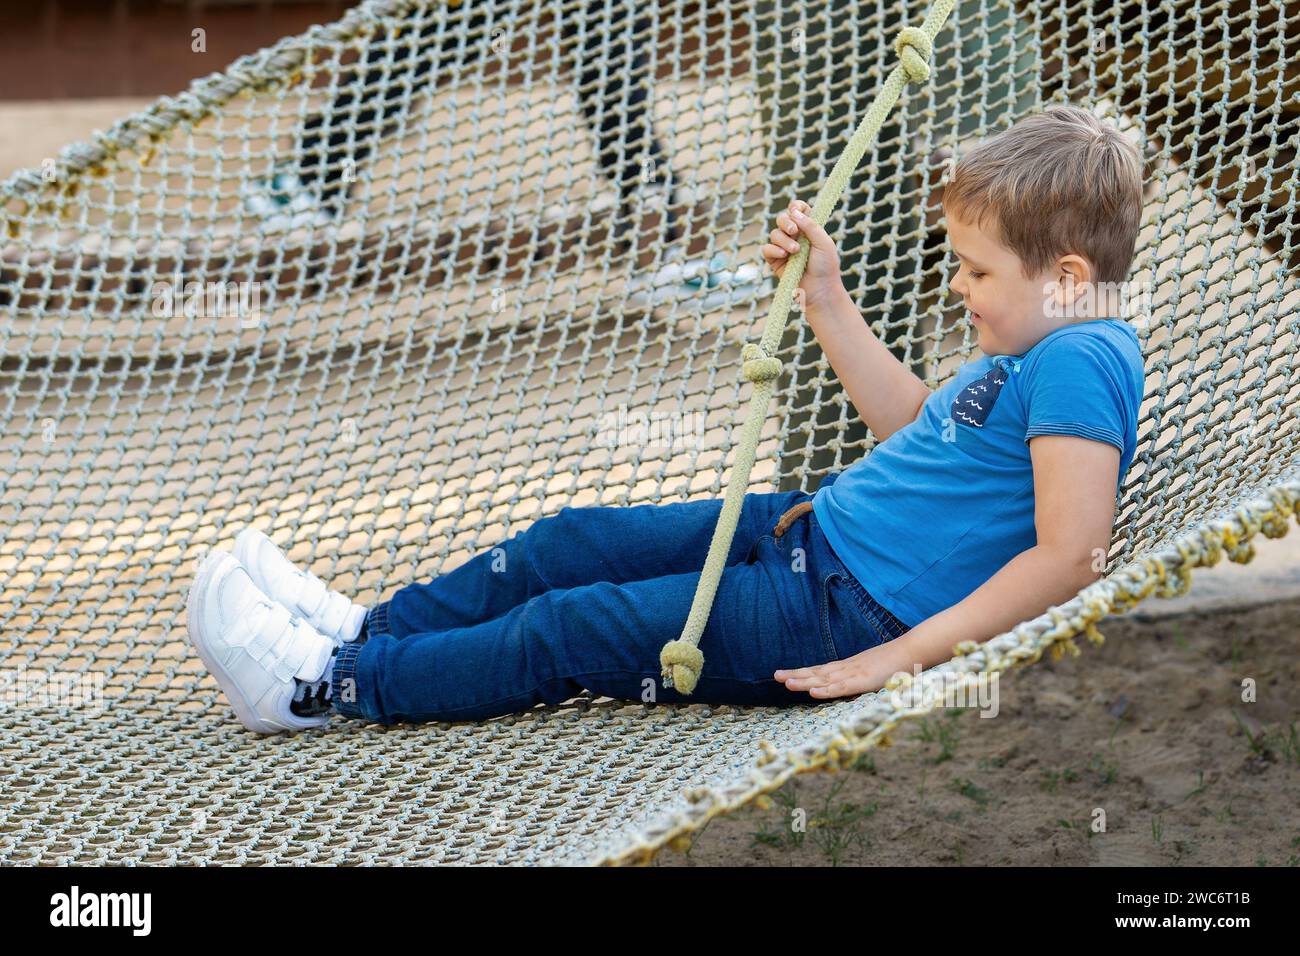 Portrait of a little boy in climbing gear in a rope park, holding a rope with a knot. Kid plays in rope adventure park. Obstacle course for children. Stock Photo